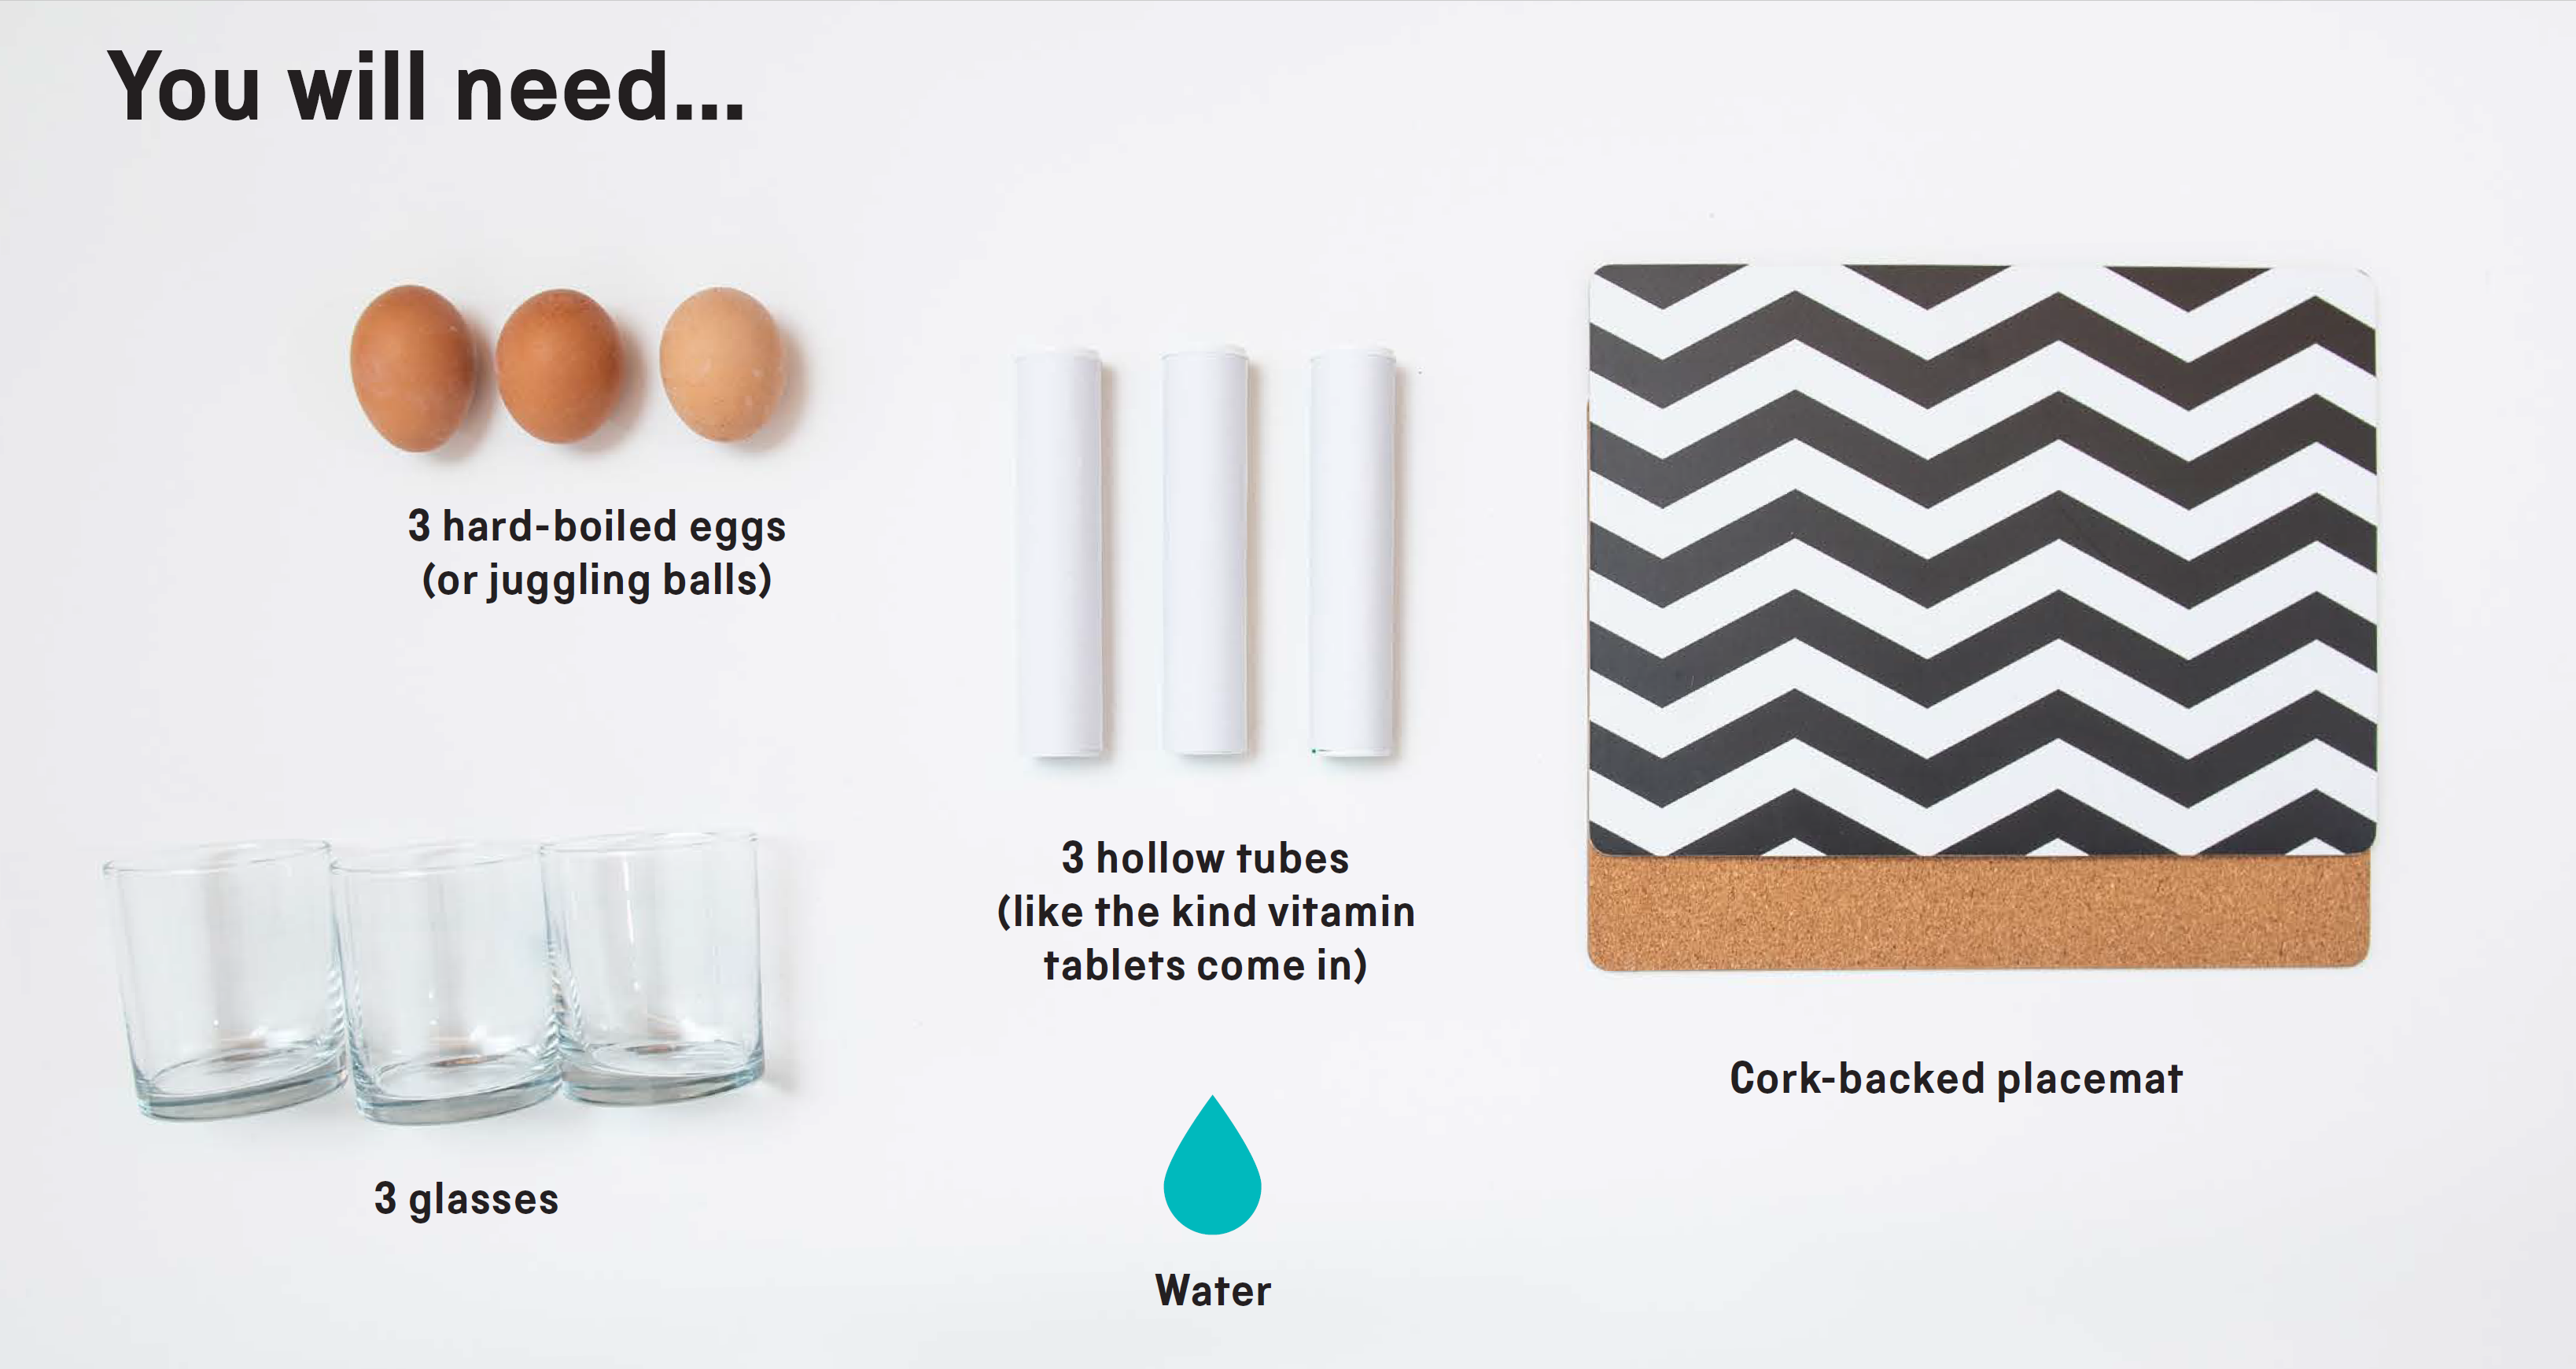 You will need: 3 hard-boiled eggs (or juggling balls), 3 hollow tubes (like the kind vitamin tablets come in), water, 3 glasses and a cork-based placemat